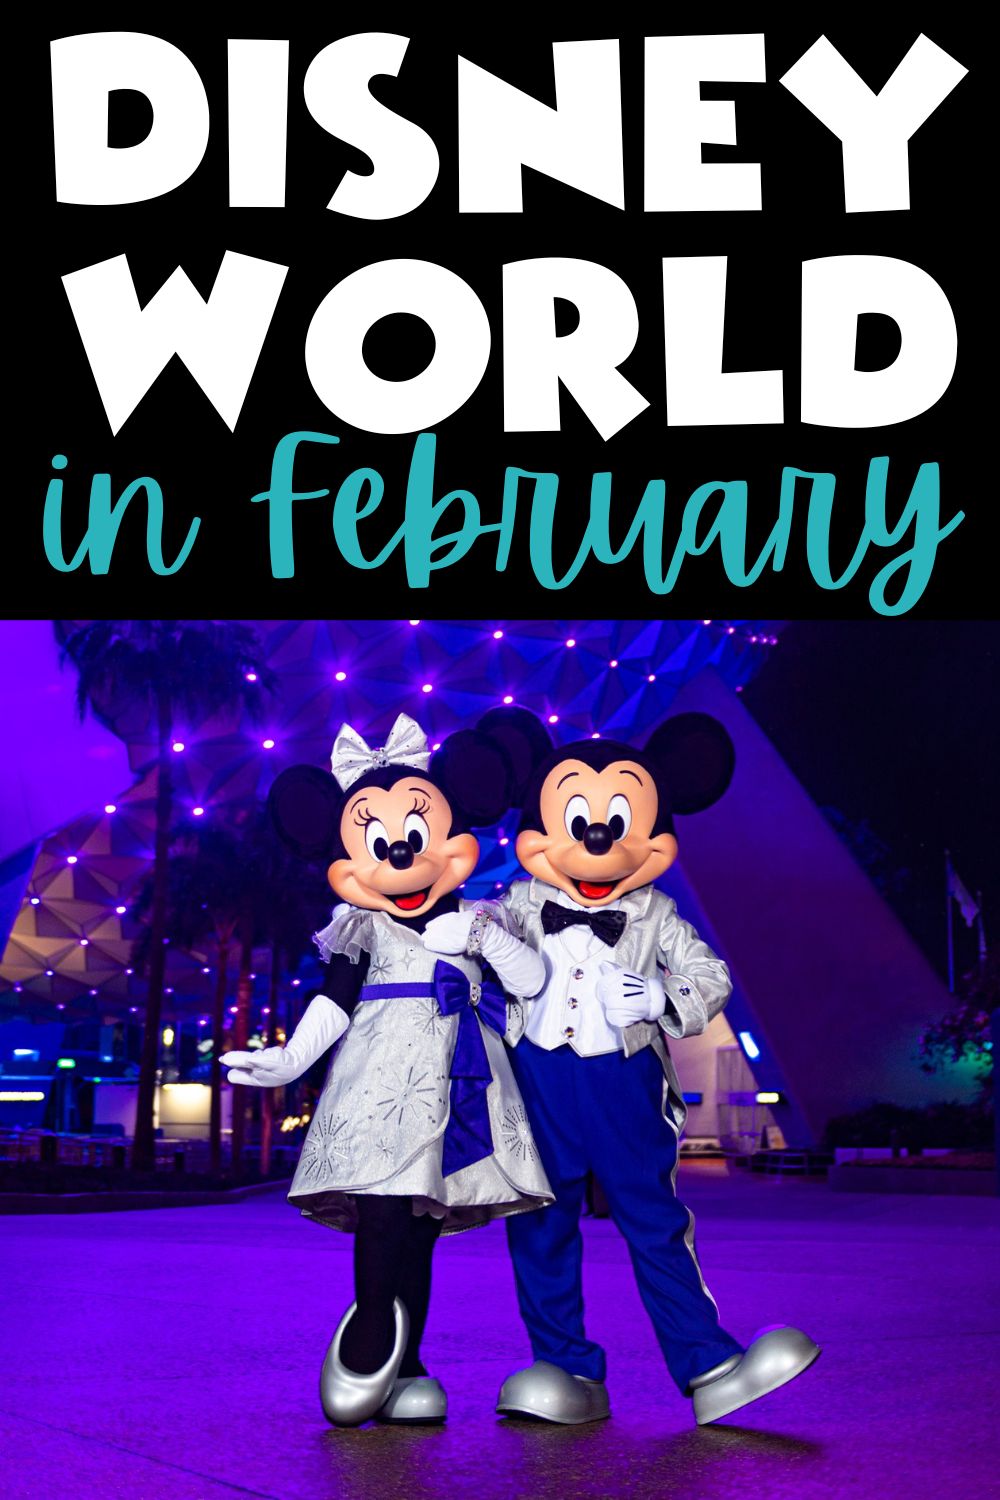 Guide to Going to Disney World in February